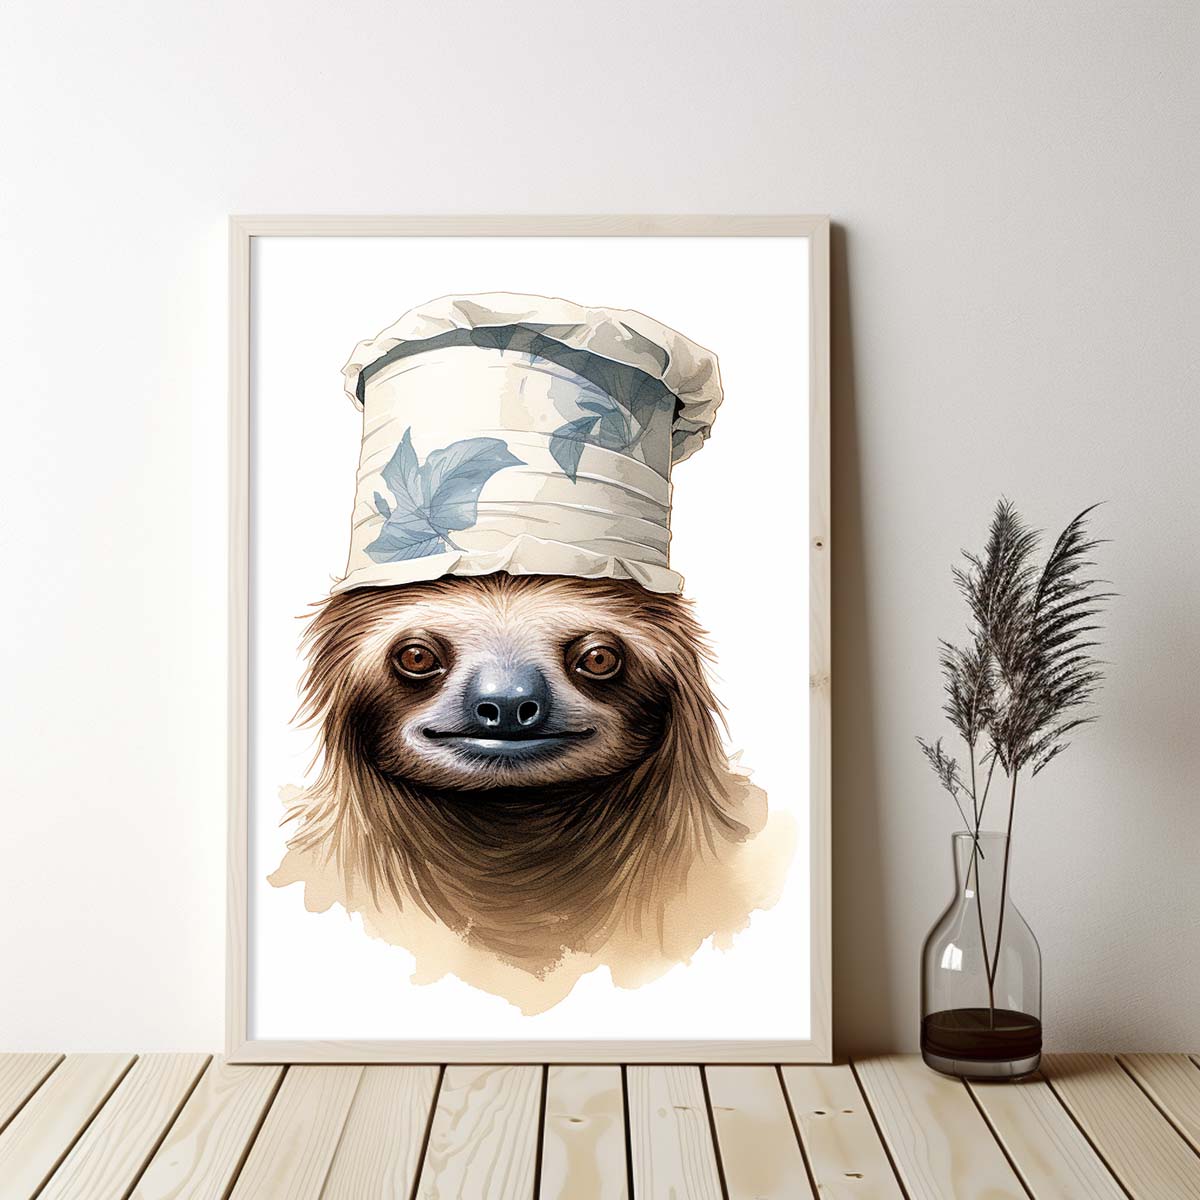 Cute Sloth 01 With Toilet Paper, Canvas Or Poster, Funny Sloth Art, Bathroom Wall Decor, Home Decor, Bathroom Wall Art, Sloth Wall Decor, Animal Decor, Animal Gift, Animal Illustration, Digital Download